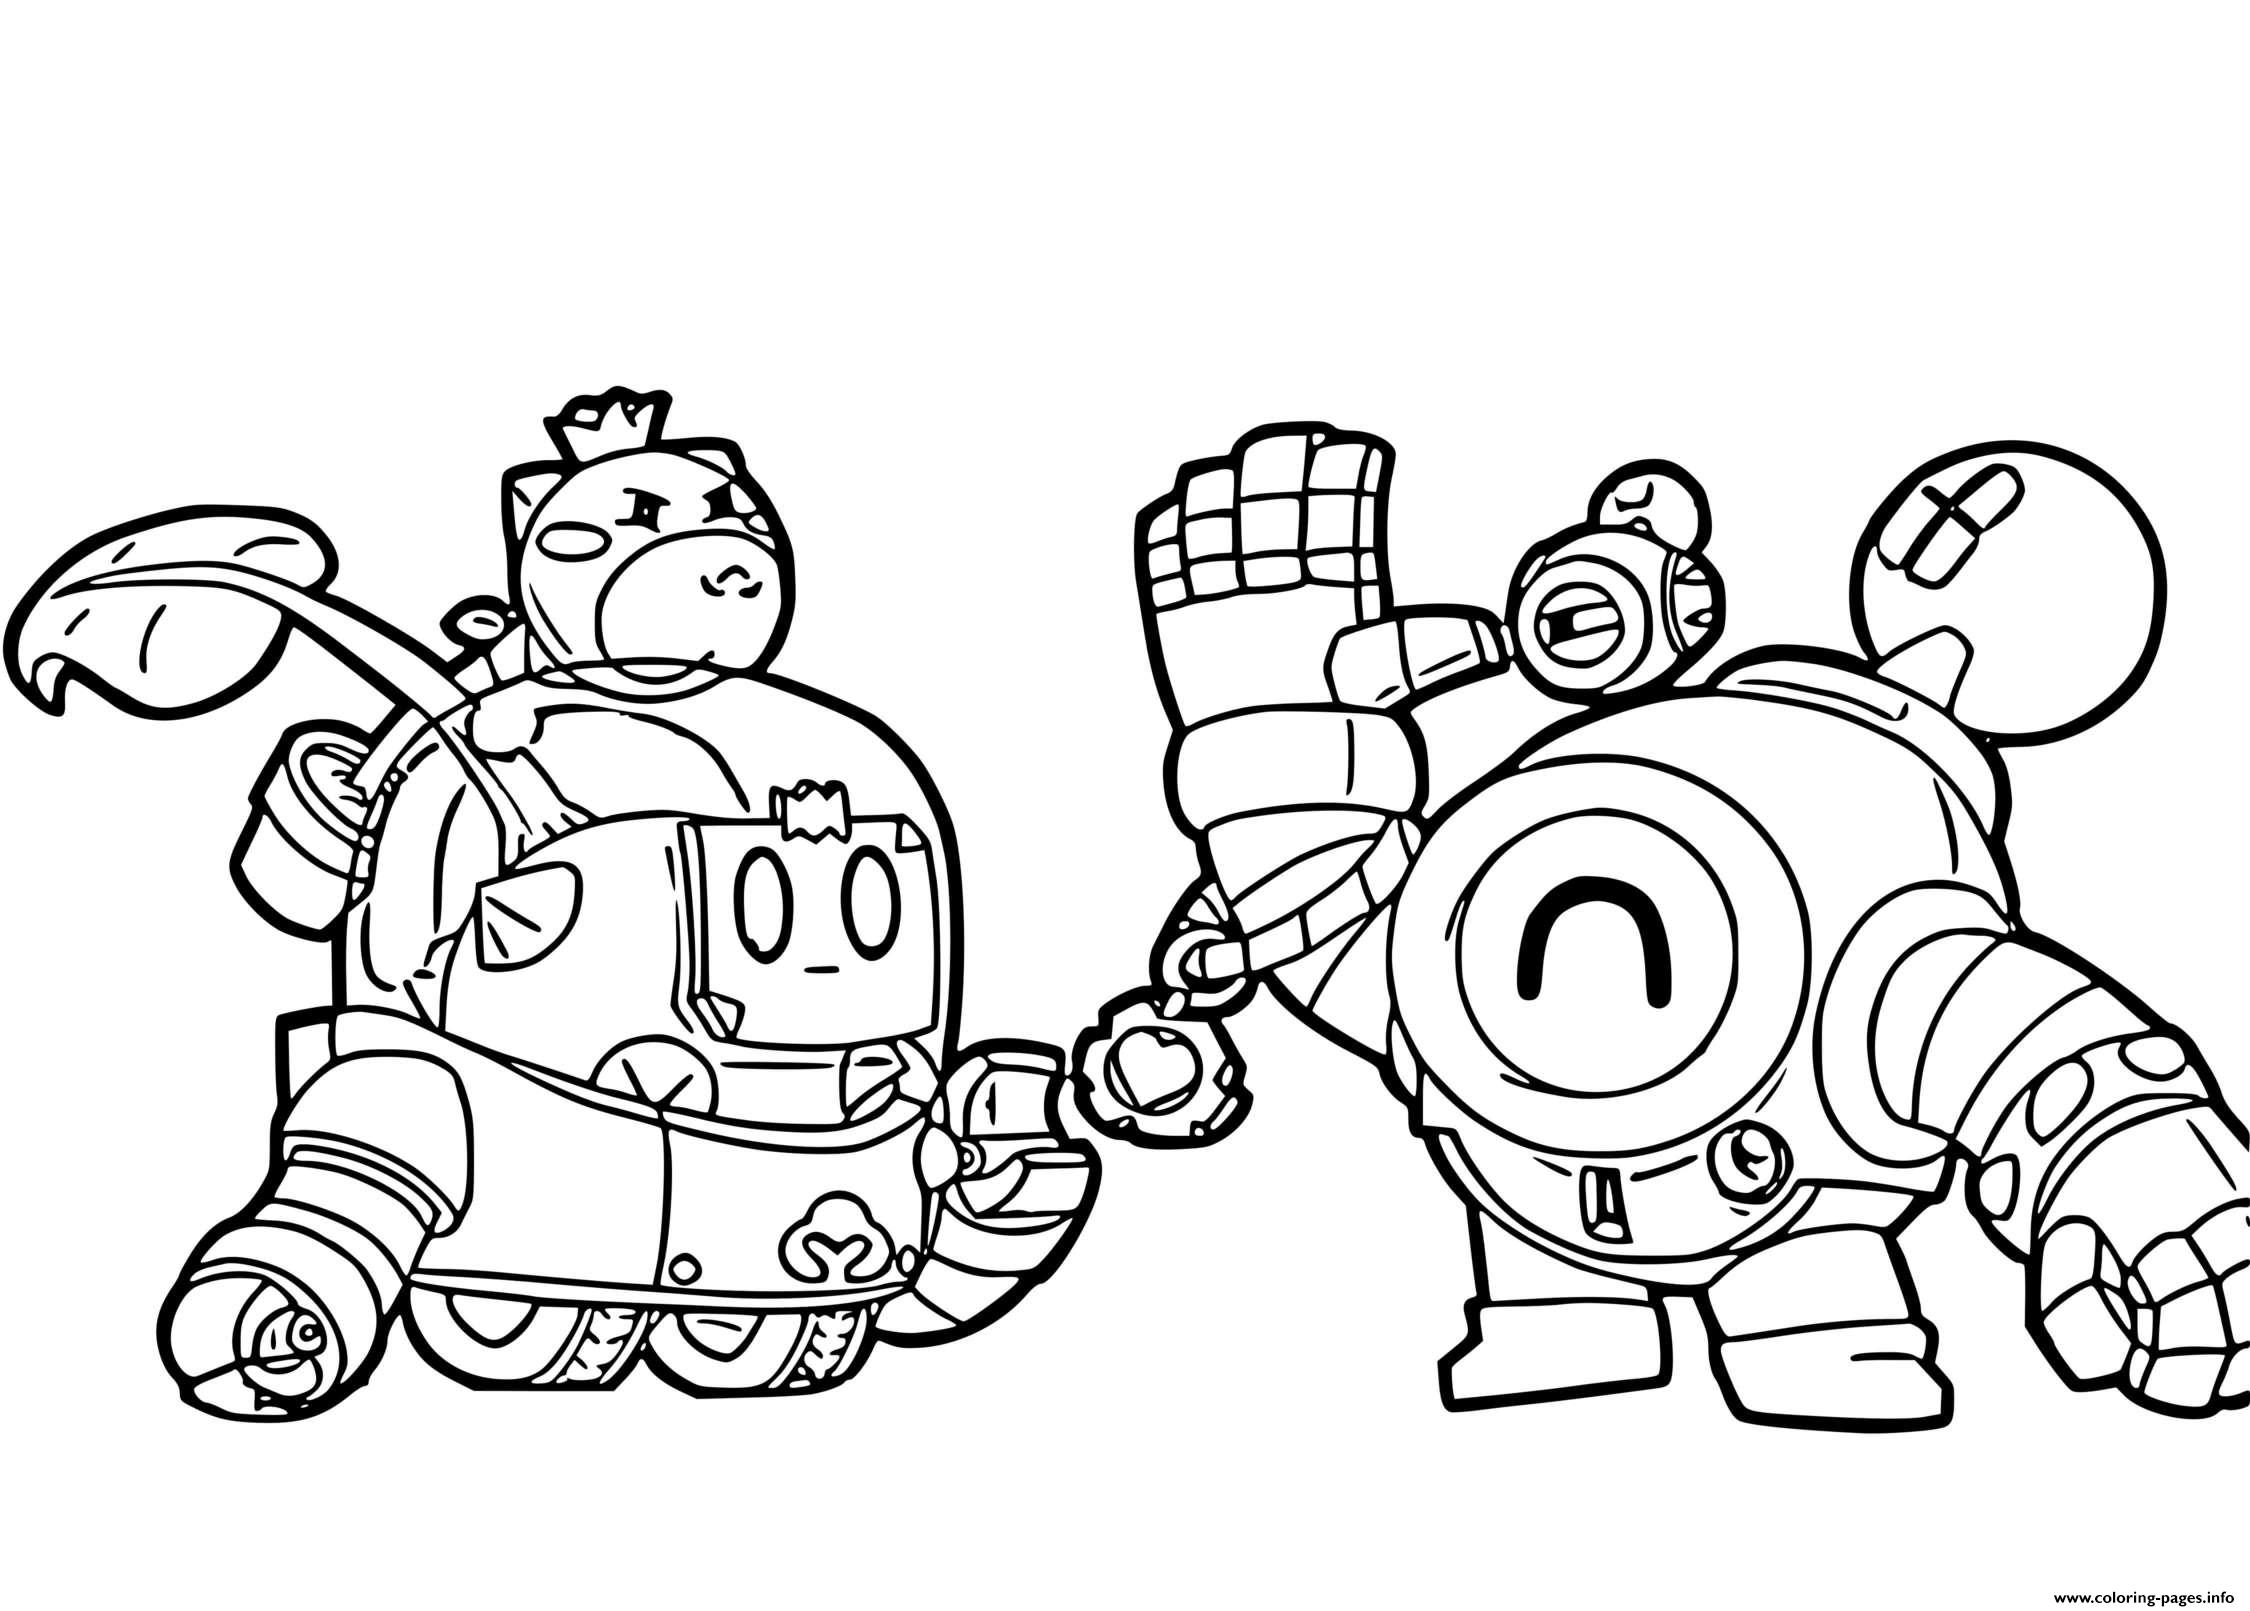 Sprout Et Nani Brawl Stars Coloring Pages Printable - image brawl stars a imprimer